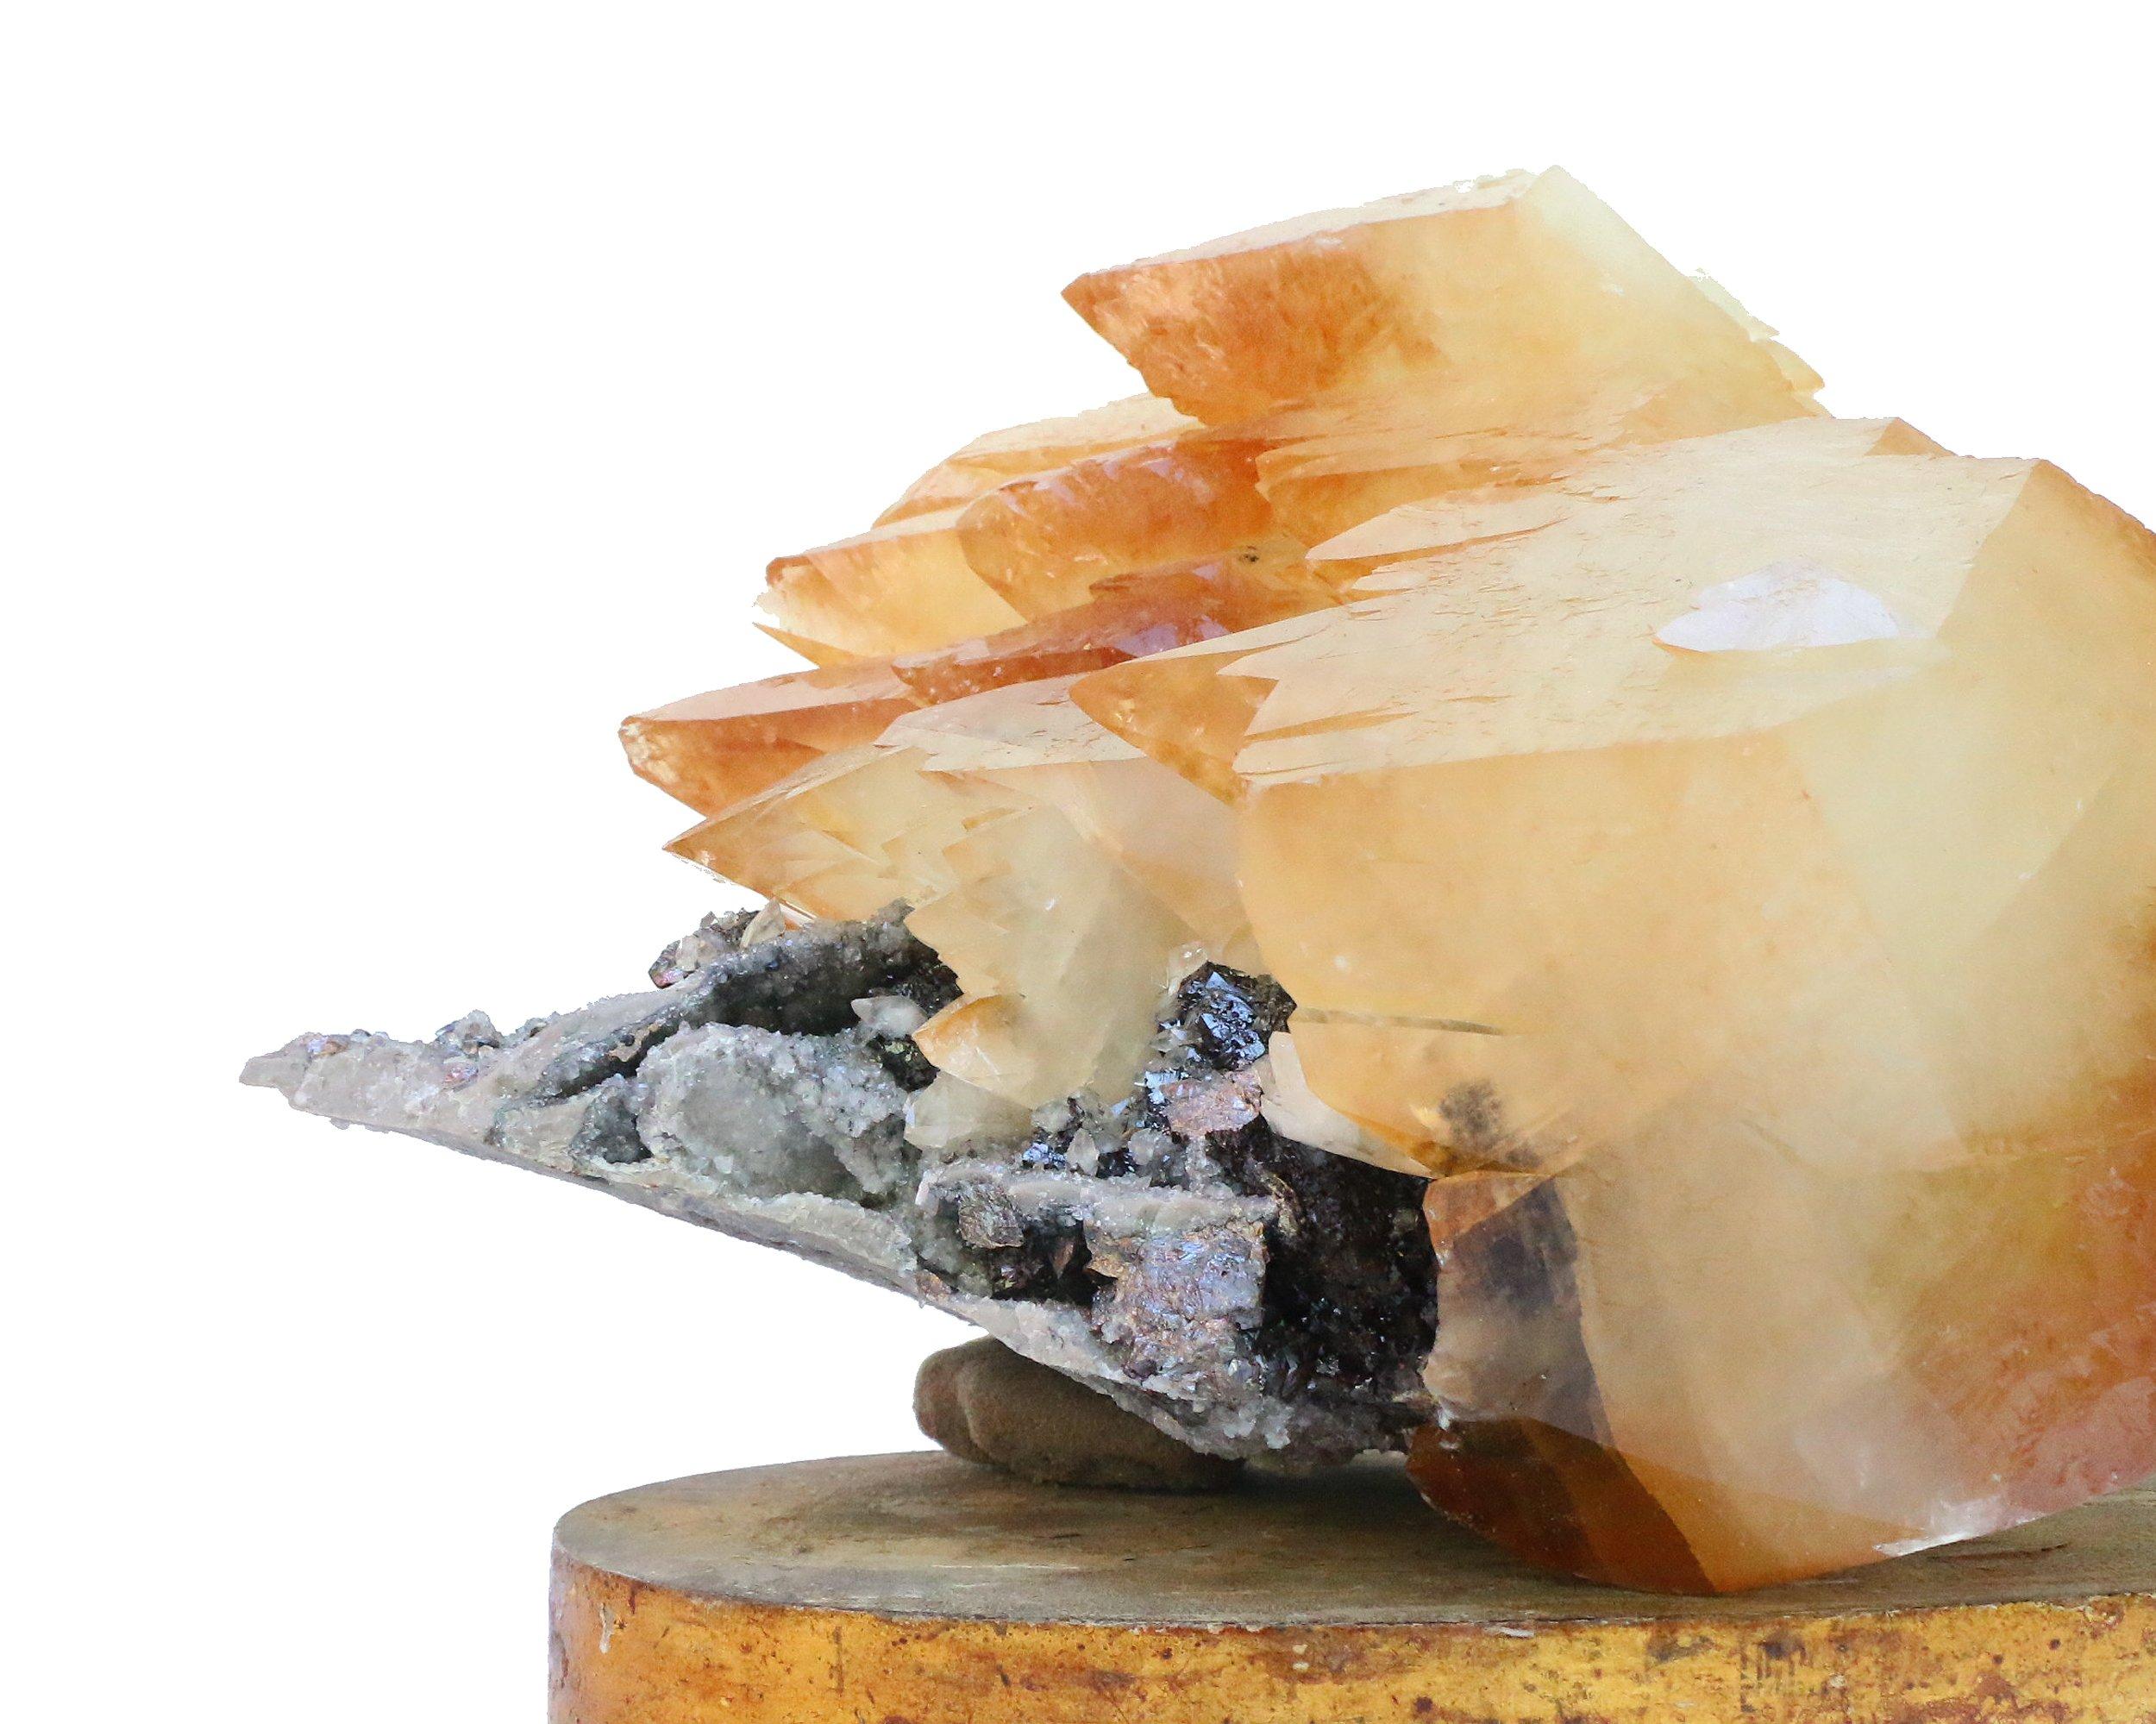 Calcite crystal with sphalerite in matrix on a coordinating 18th century Italian mecca altar base. This specimen comes from the Elmwood Mine and is unusually large calcite crystal. It is an example of the world's finest crystallized calcite. With